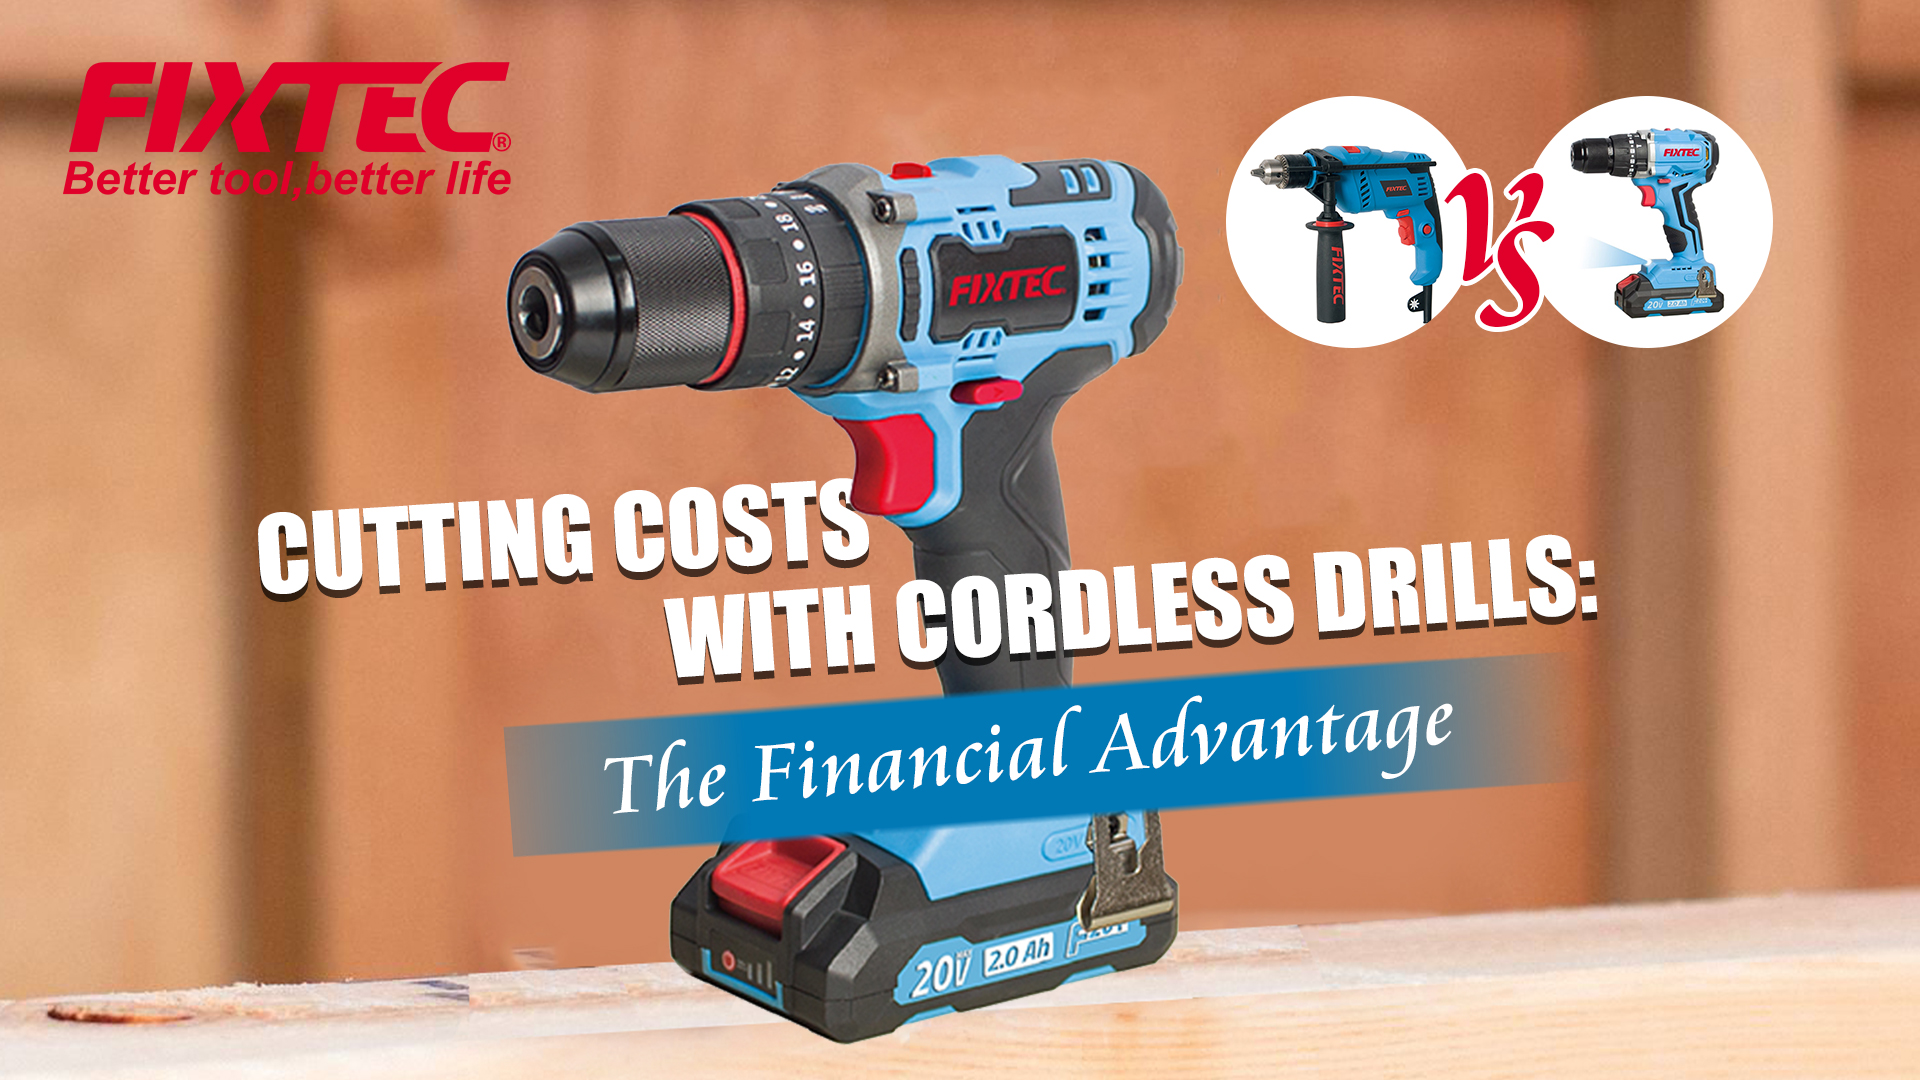 Cutting Cords, Cutting Costs: The Financial Benefits of Switching to Cordless Drills